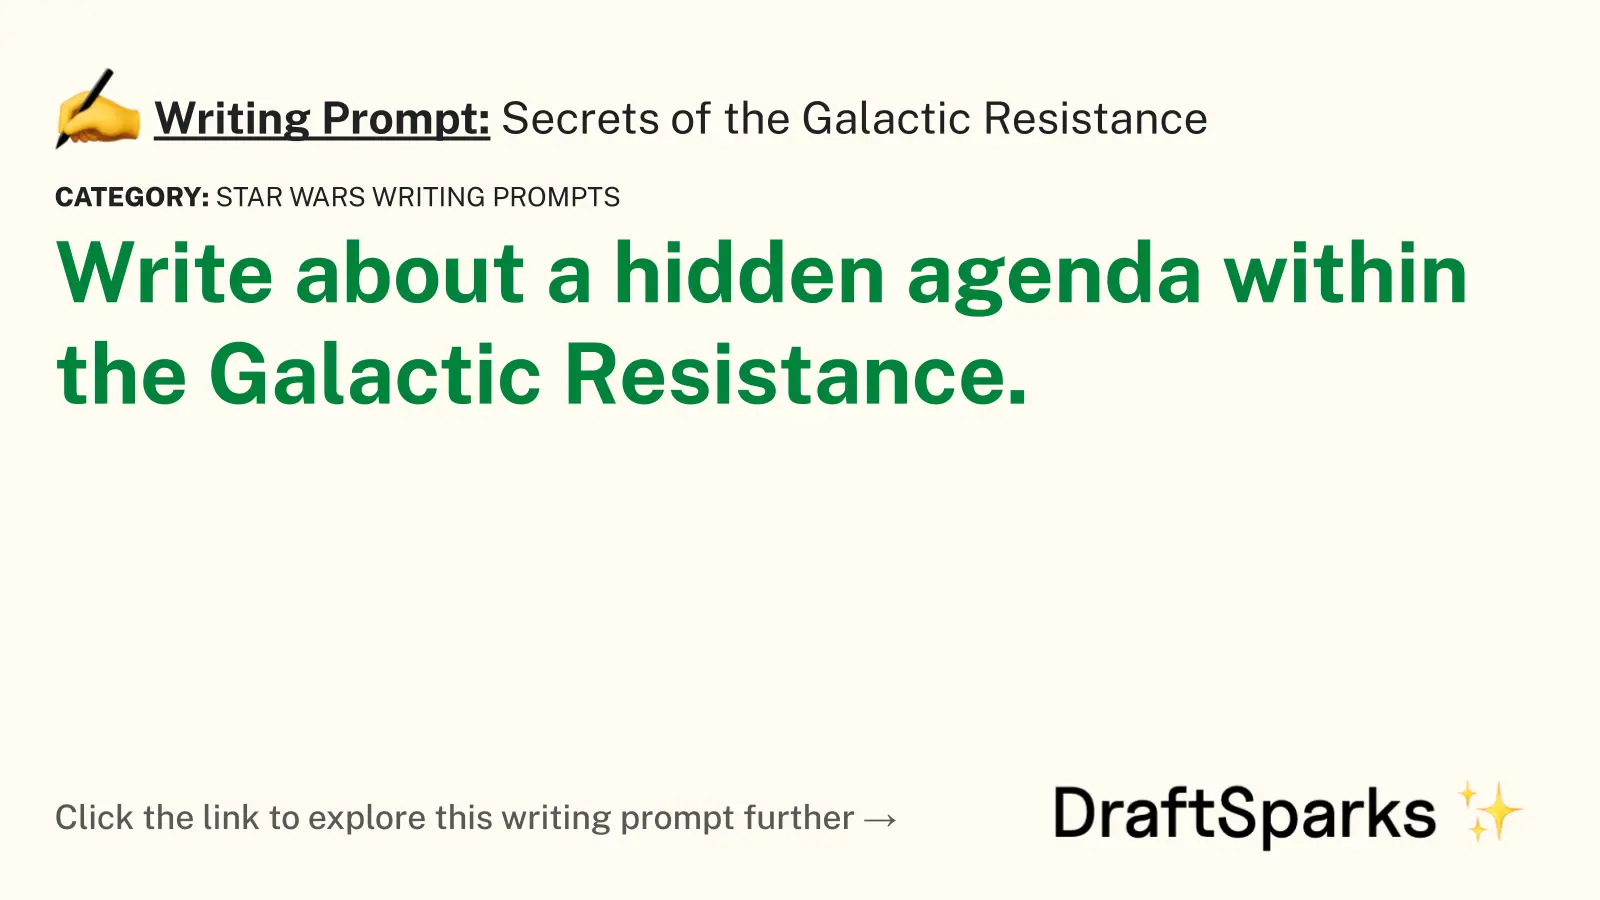 Secrets of the Galactic Resistance